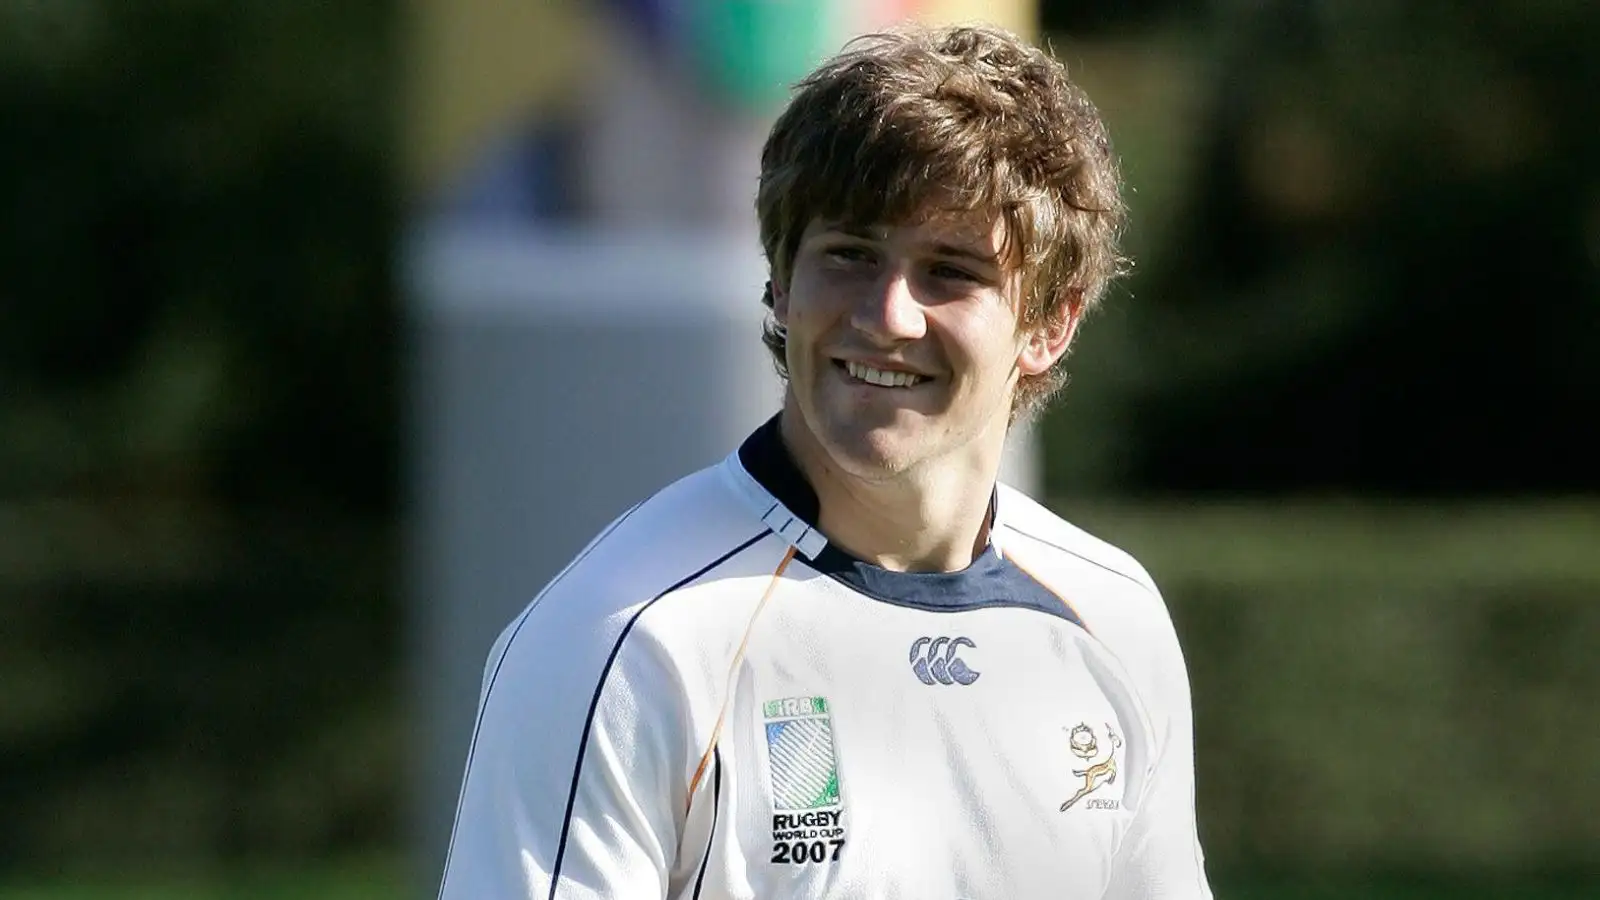 South Africa's Frans Steyn attends a Springboks training session during the 2007 Rugby World Cup Tri Nations